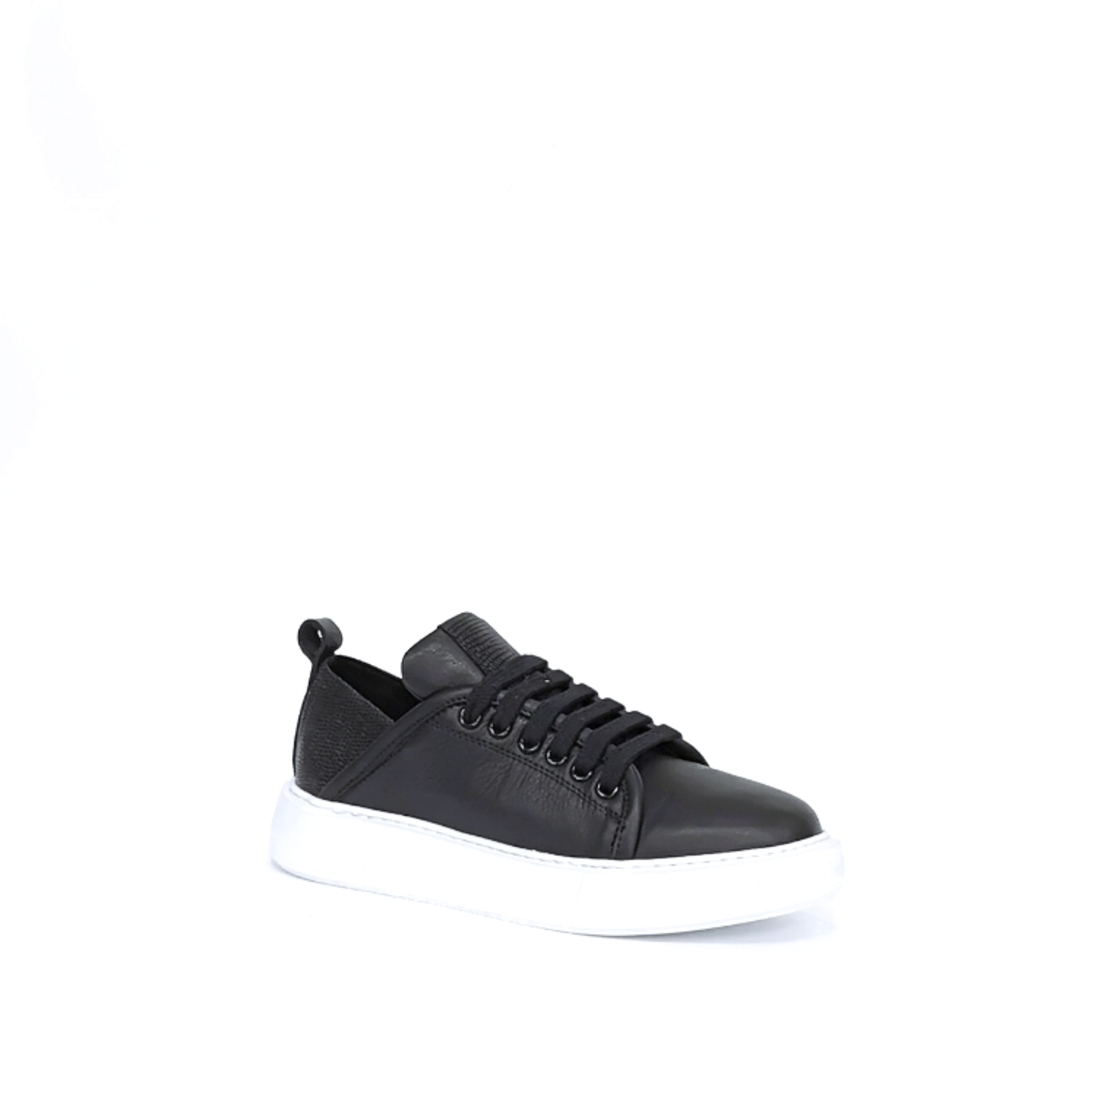 Women's sneaker made of natural leather in black color with anatomical insole/72100